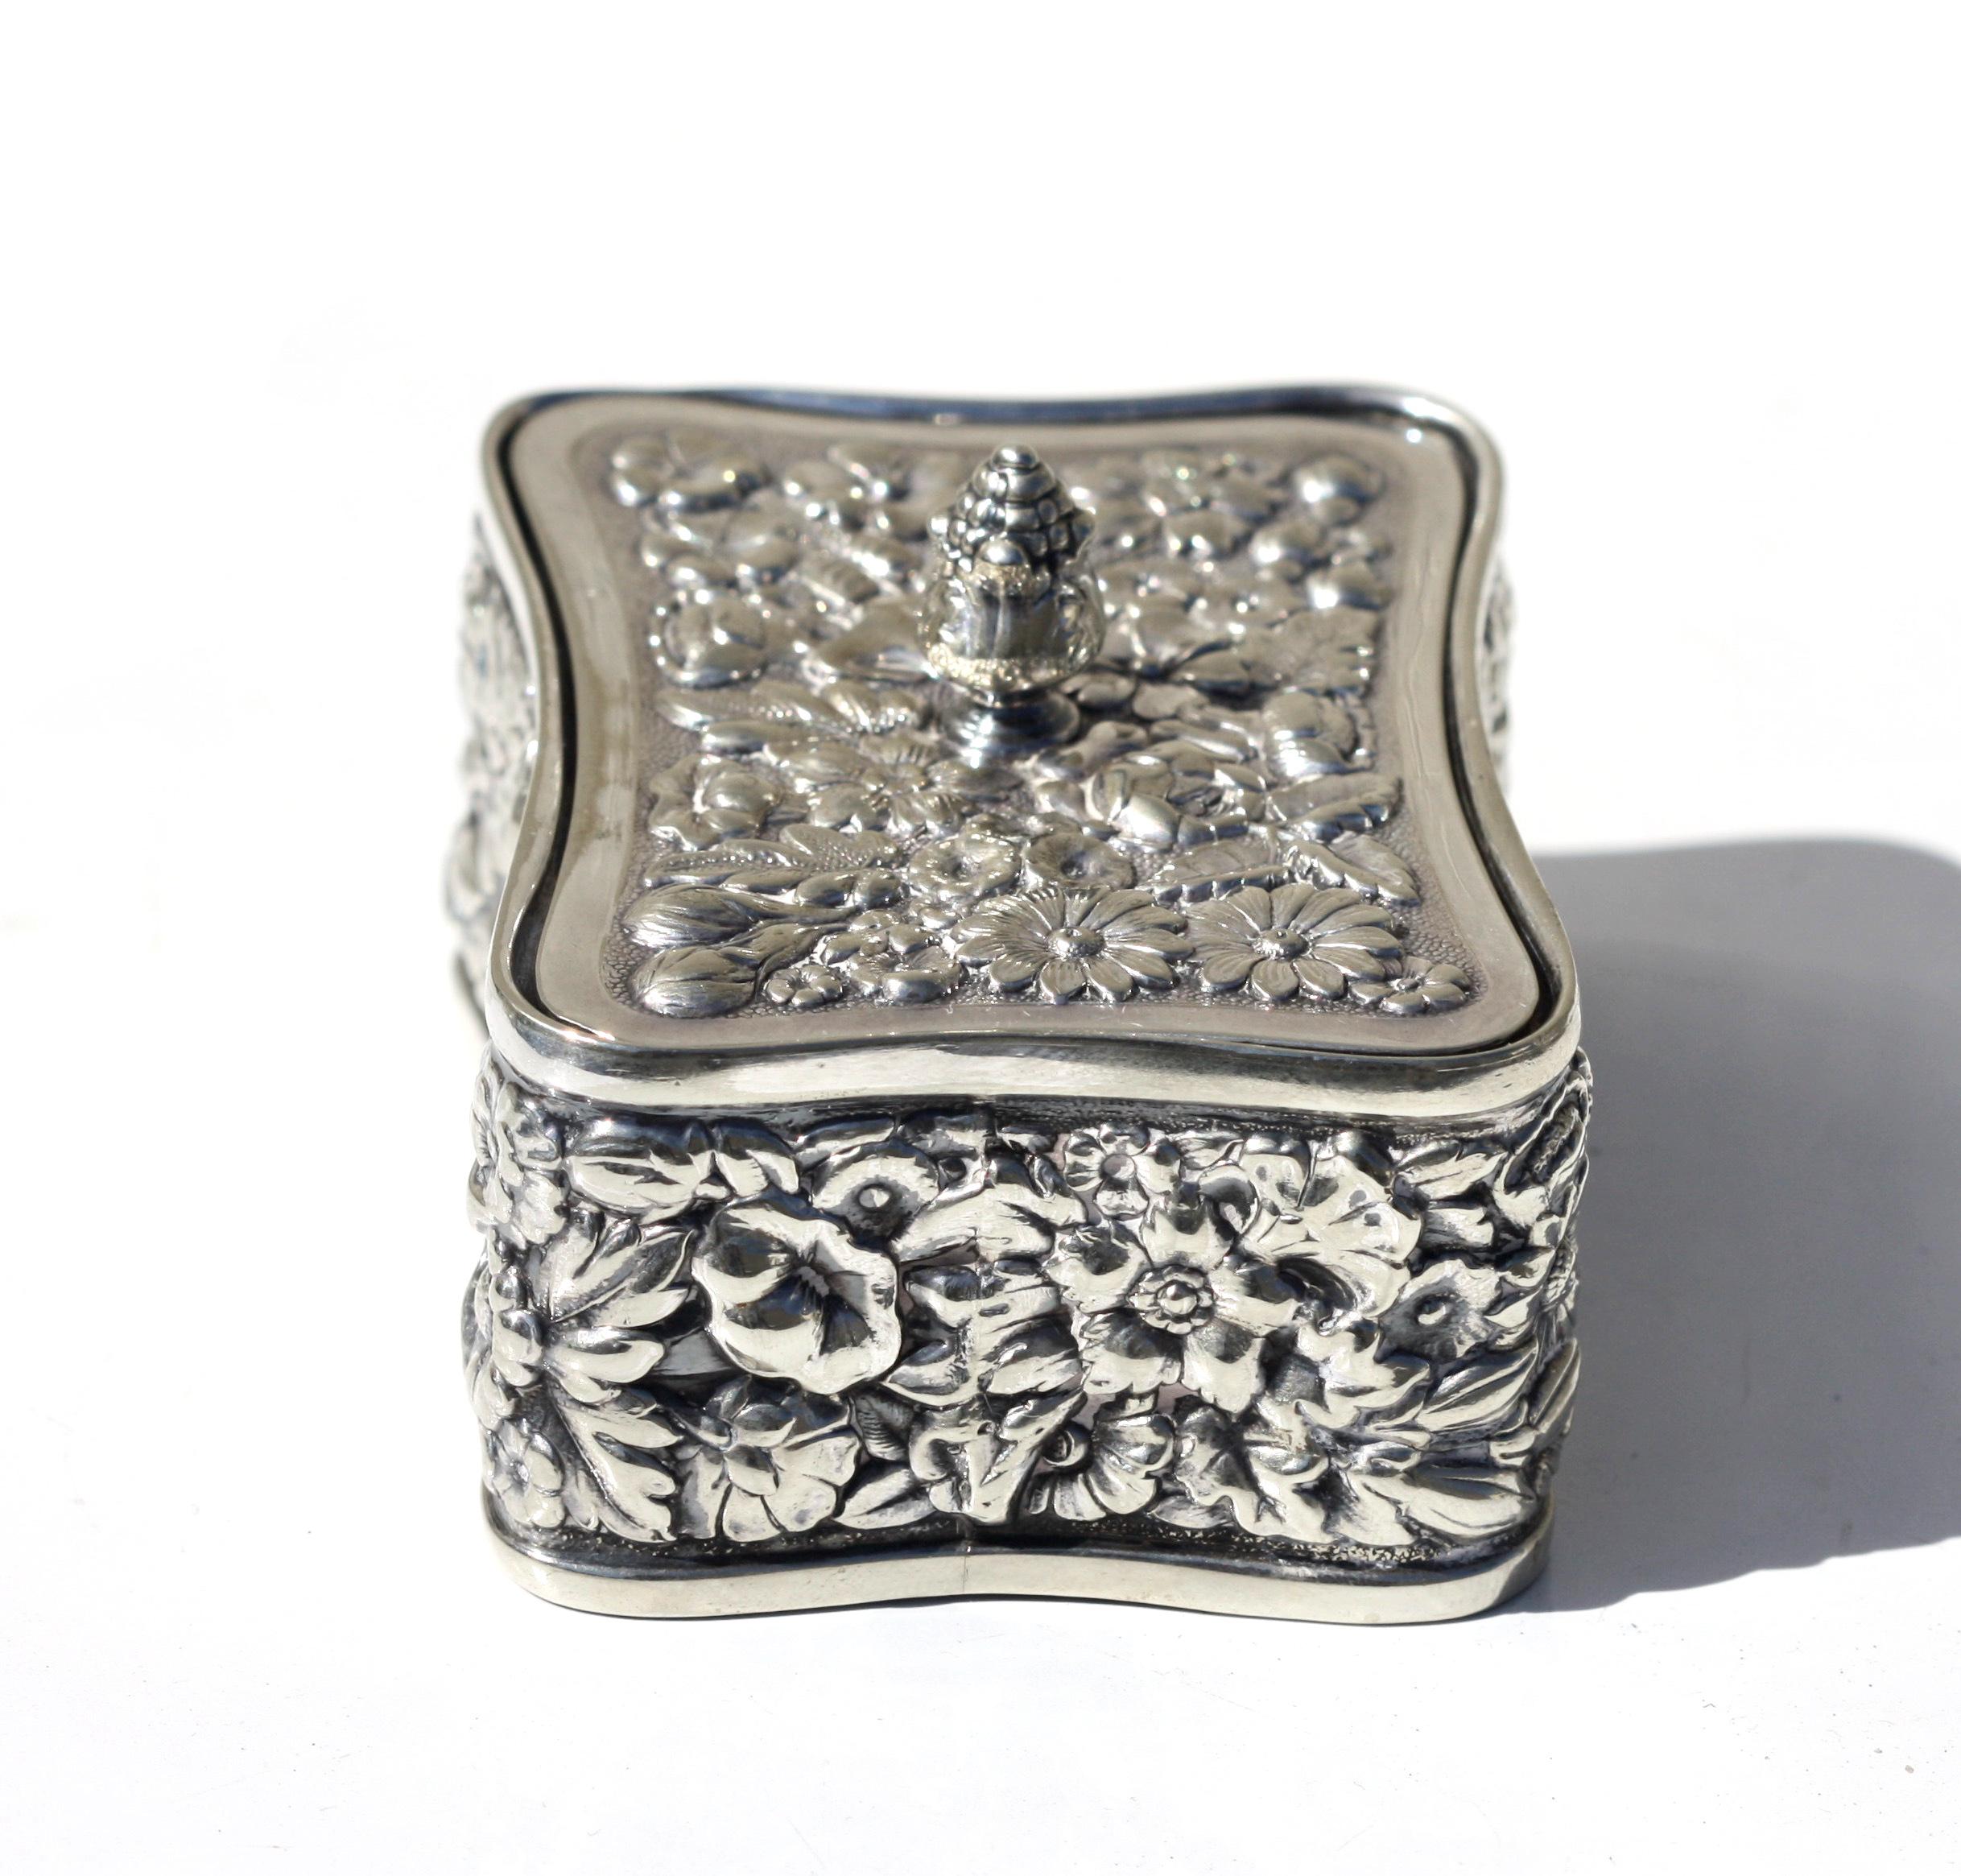 Tiffany & Co. Silver-Soldered Stamp Box and Cover In Good Condition For Sale In West Palm Beach, FL